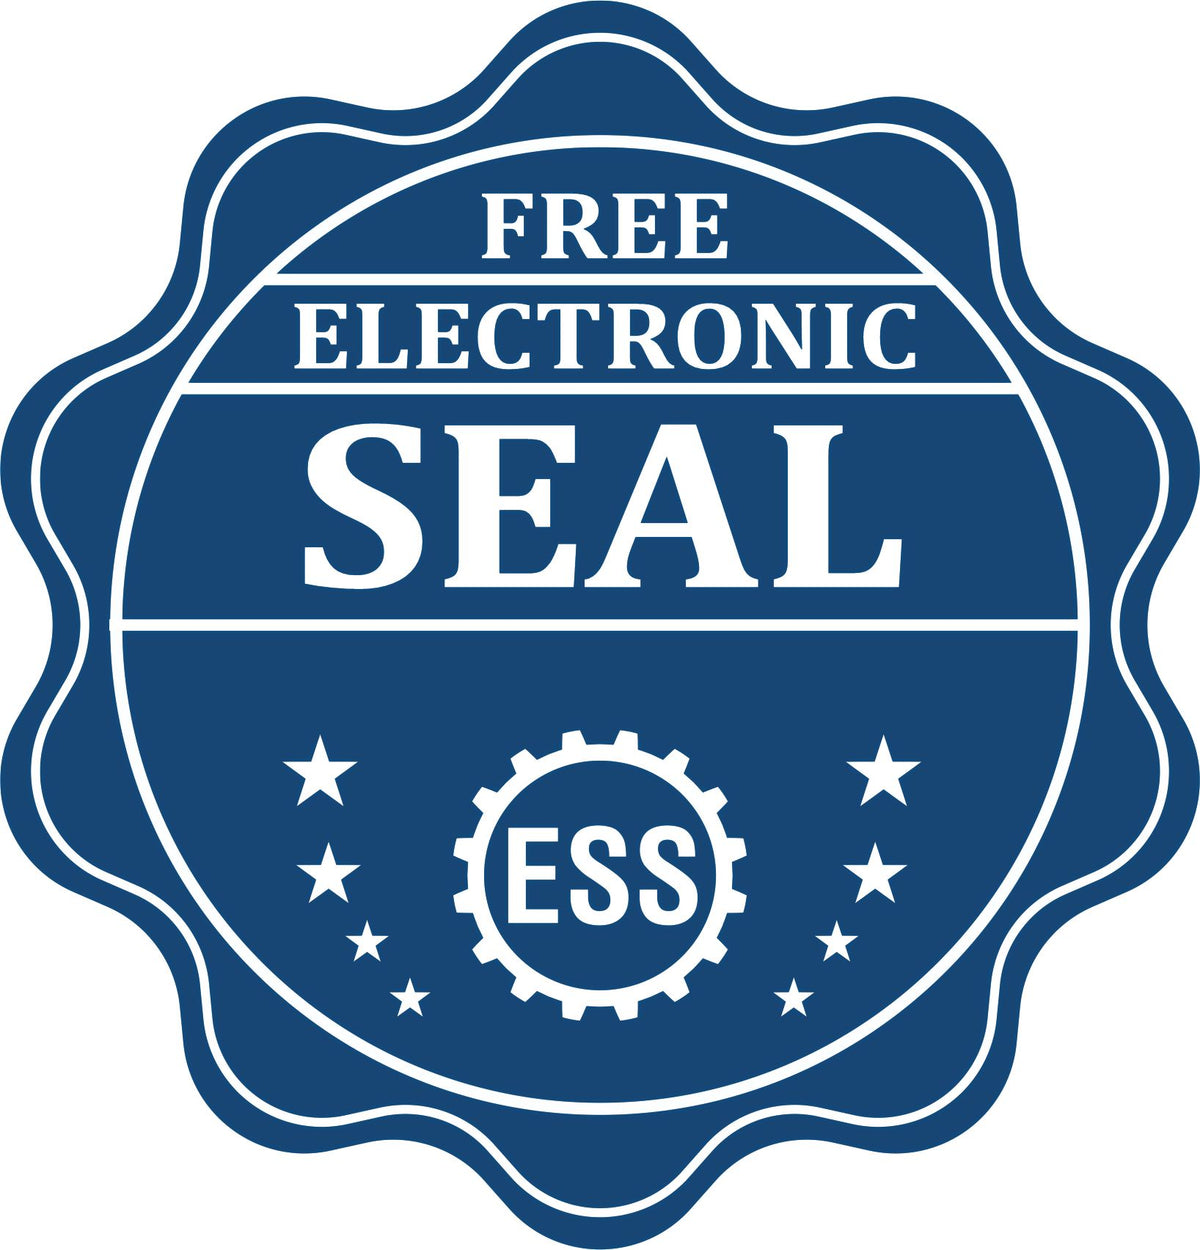 A badge showing a free electronic seal for the State of Wyoming Extended Long Reach Geologist Seal with stars and the ESS gear on the emblem.